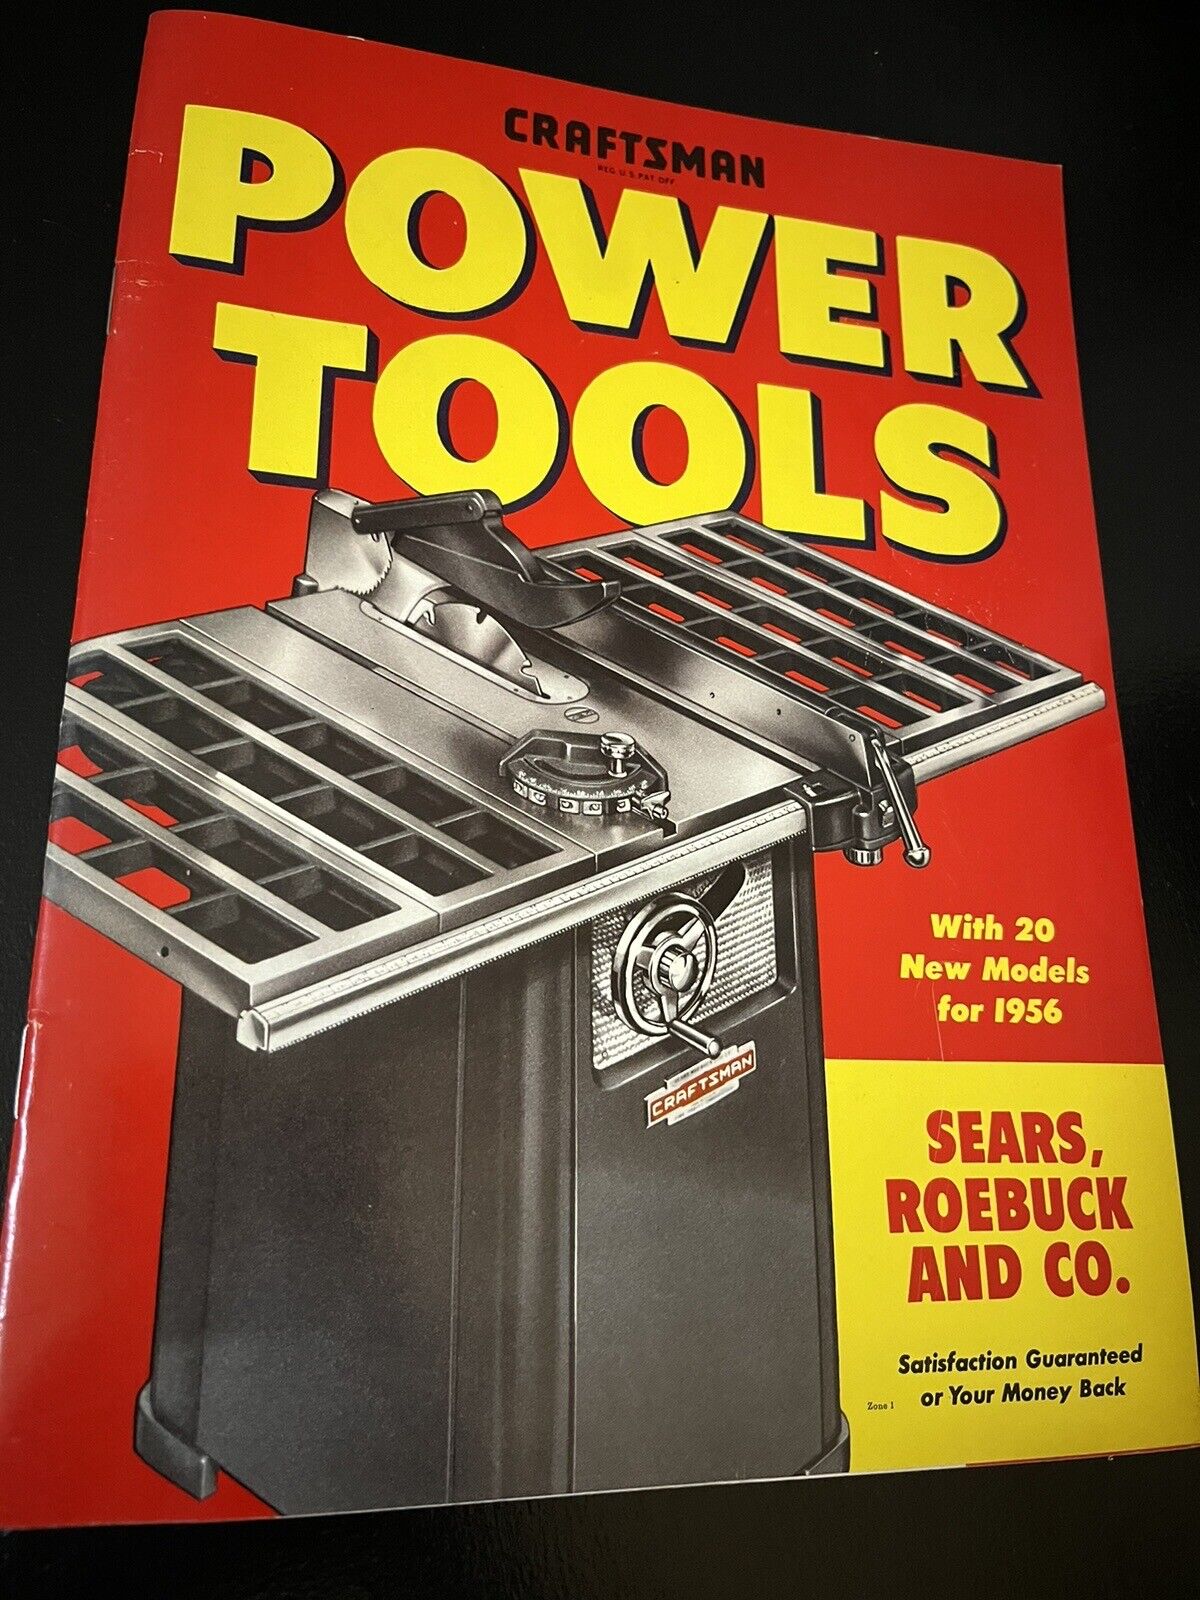 CRAFTSMAN POWER TOOLS 1956 WITH 20 NEW MODELS CATALOG SEARS, ROEBUCK & CO. JB64